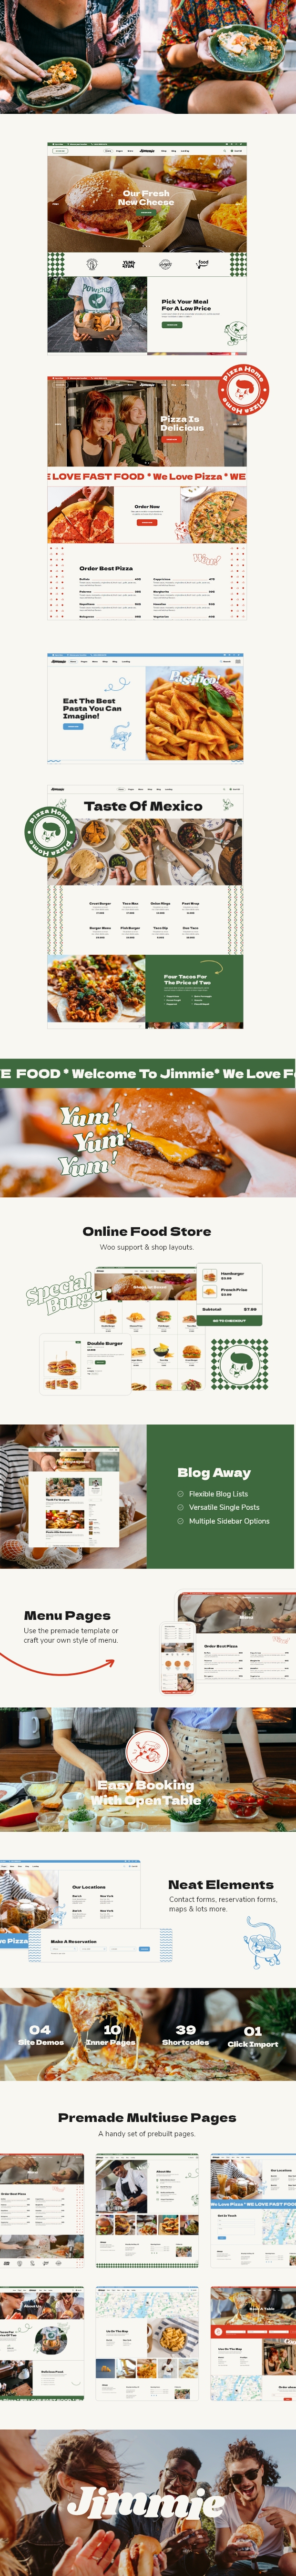 Jimmie - Fast Food Delivery and Restaurant Theme - 2